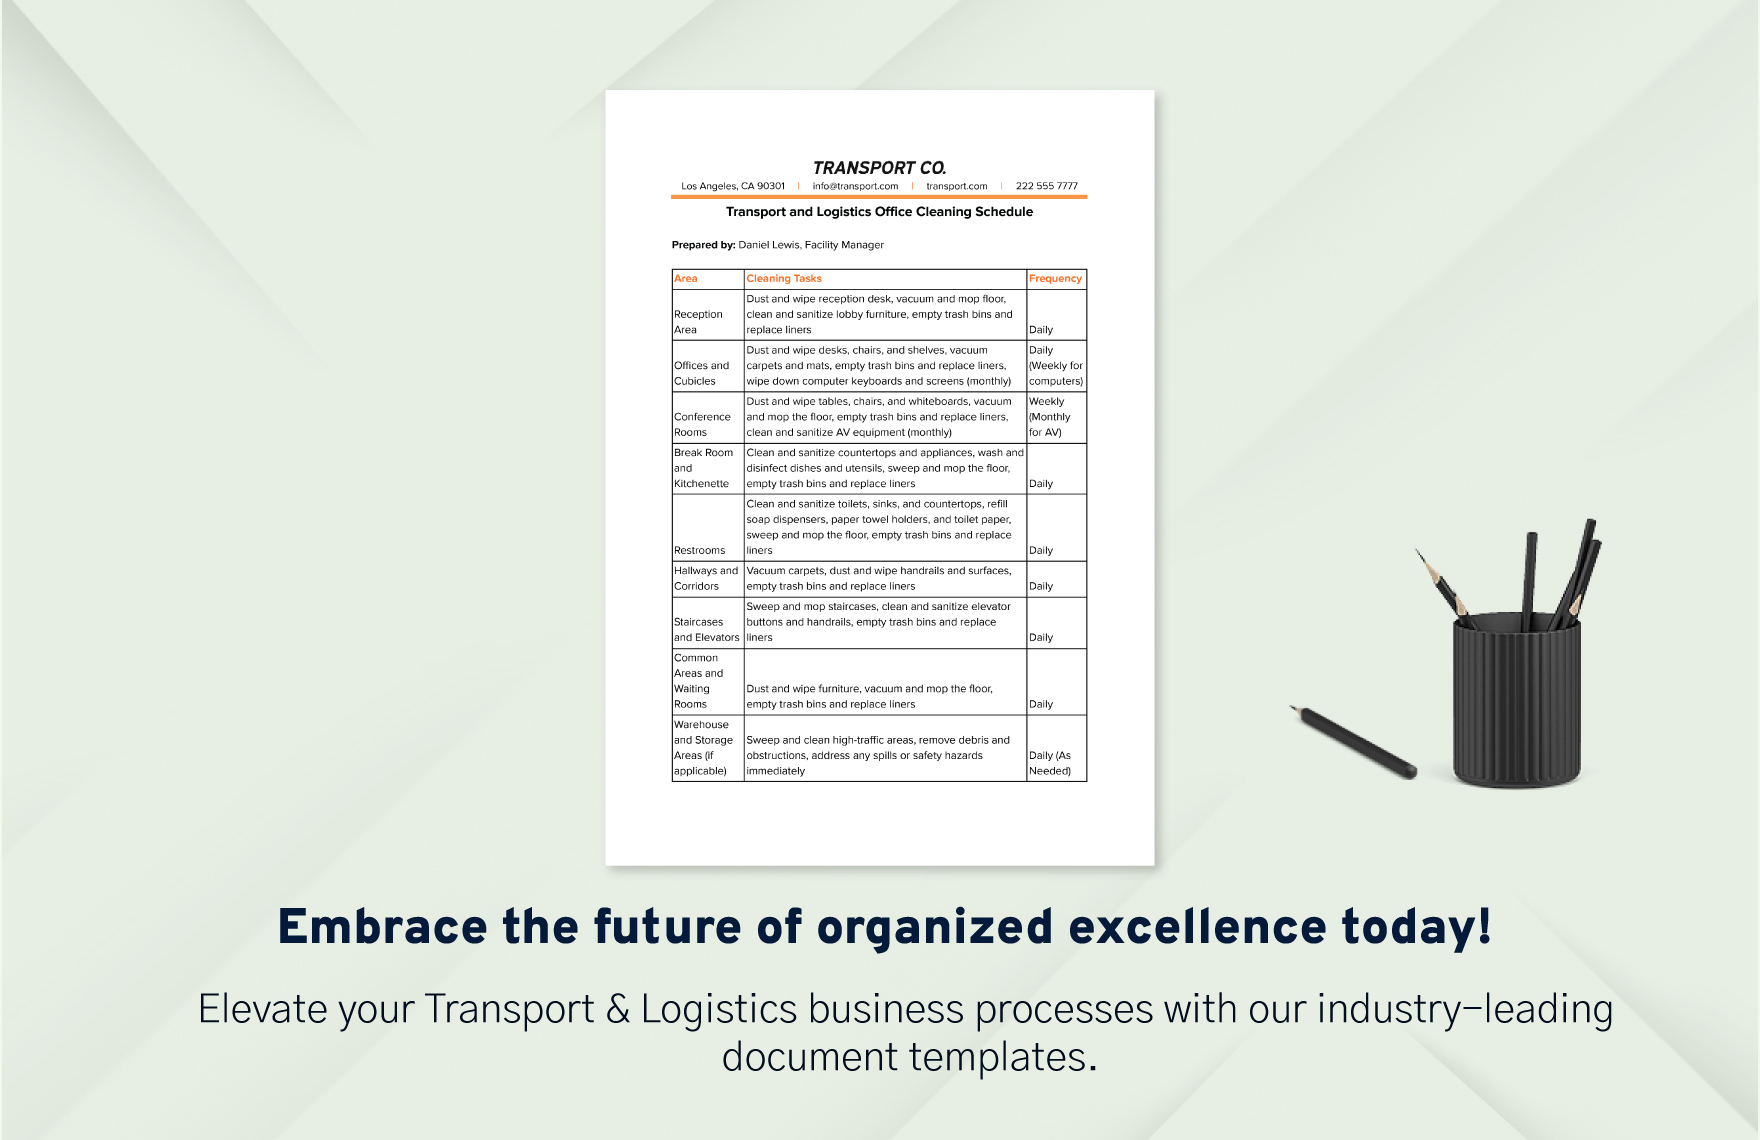 Transport and Logistics Office Cleaning Schedule Template